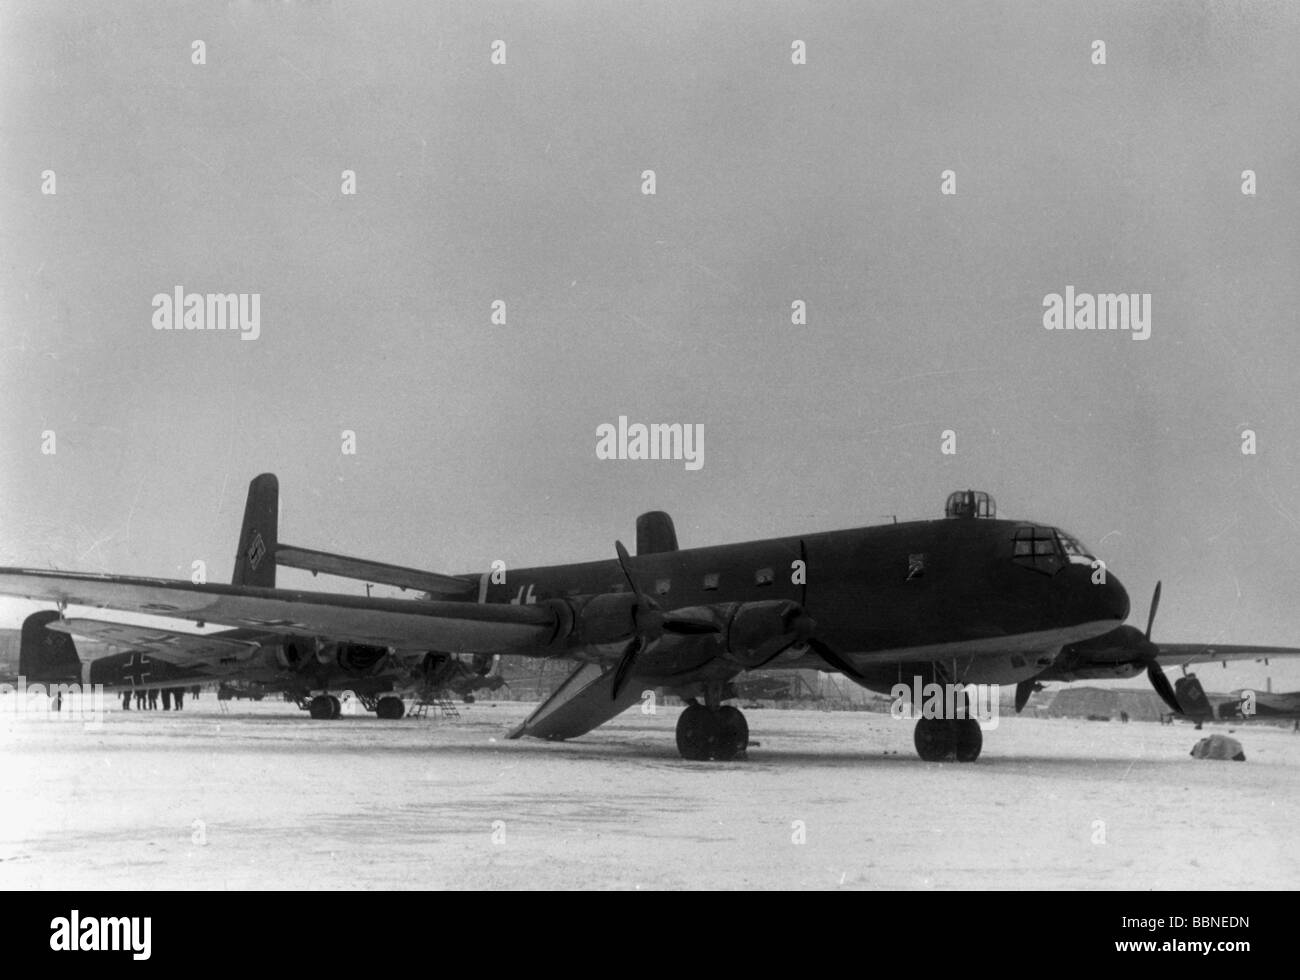 events, Second World War / WWII, aerial warfare, aircraft, German transport aircraft Junkers Ju 290, Southern Germany, 11.2.1943, in the background a Focke-Wulf Fw 200 'Condor', Stock Photo